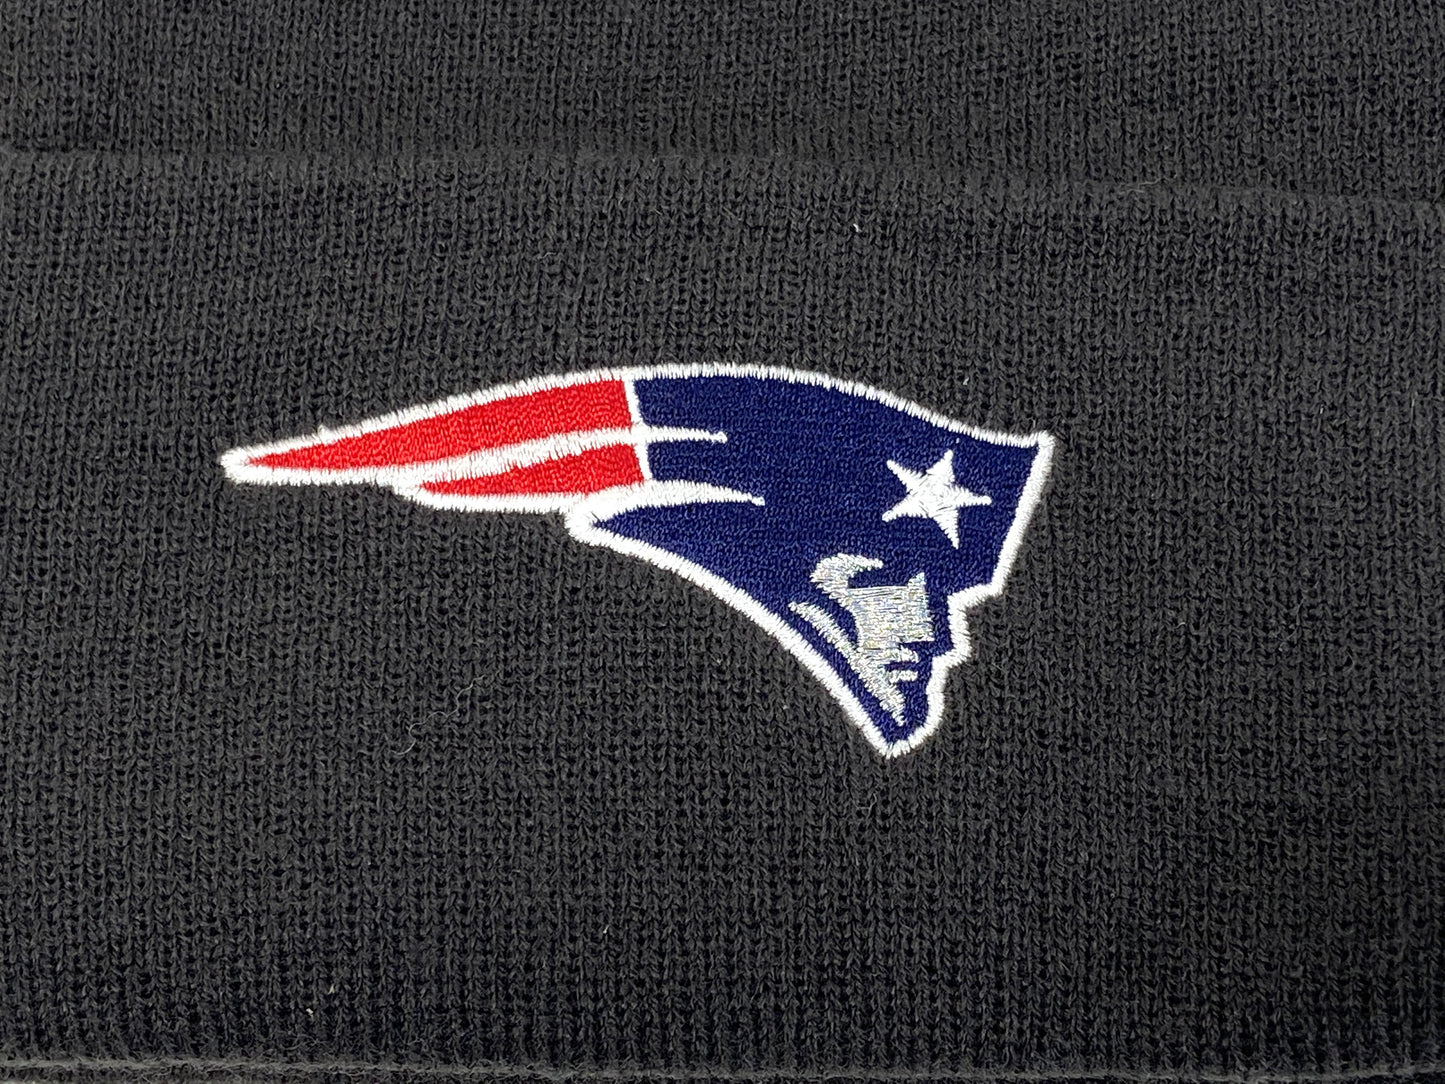 New England Patriots Vintage NFL Black Cuffed NOS Logo Knit Hat by G Knit Cap Company